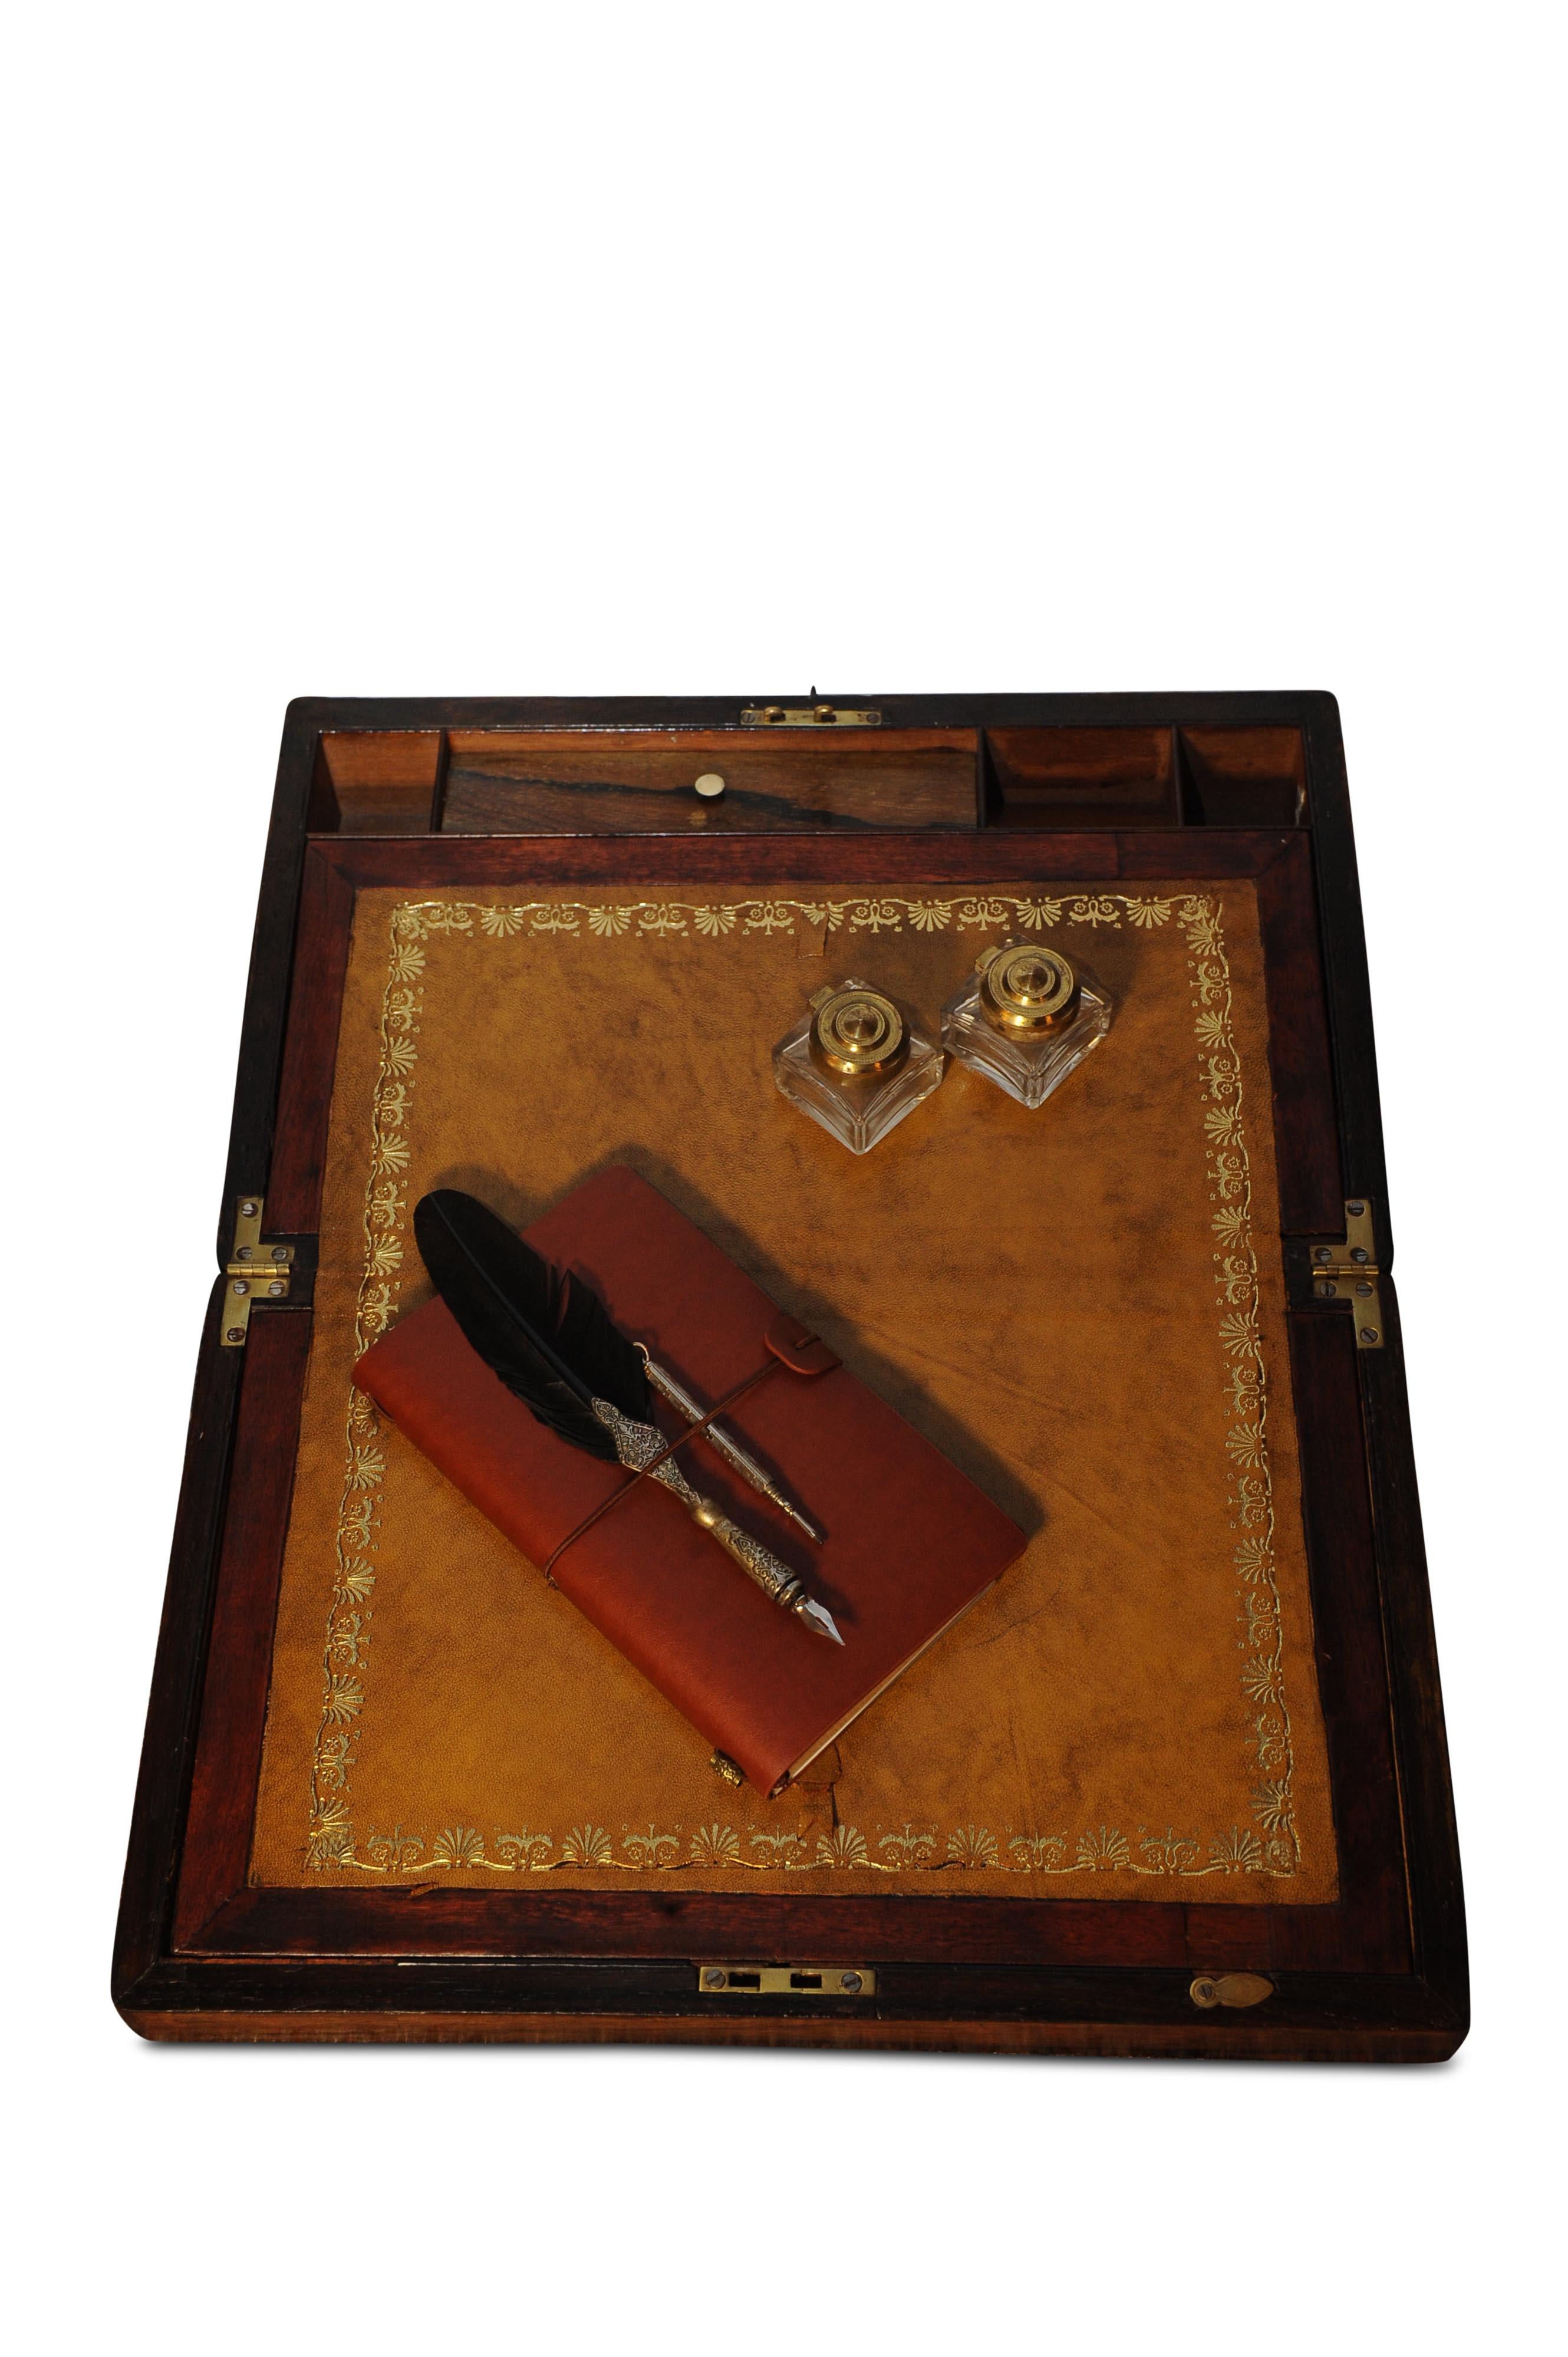 British Exquisite Victorian Rosewood & Leather Tooled Writing Slope, Inkwell and Pen